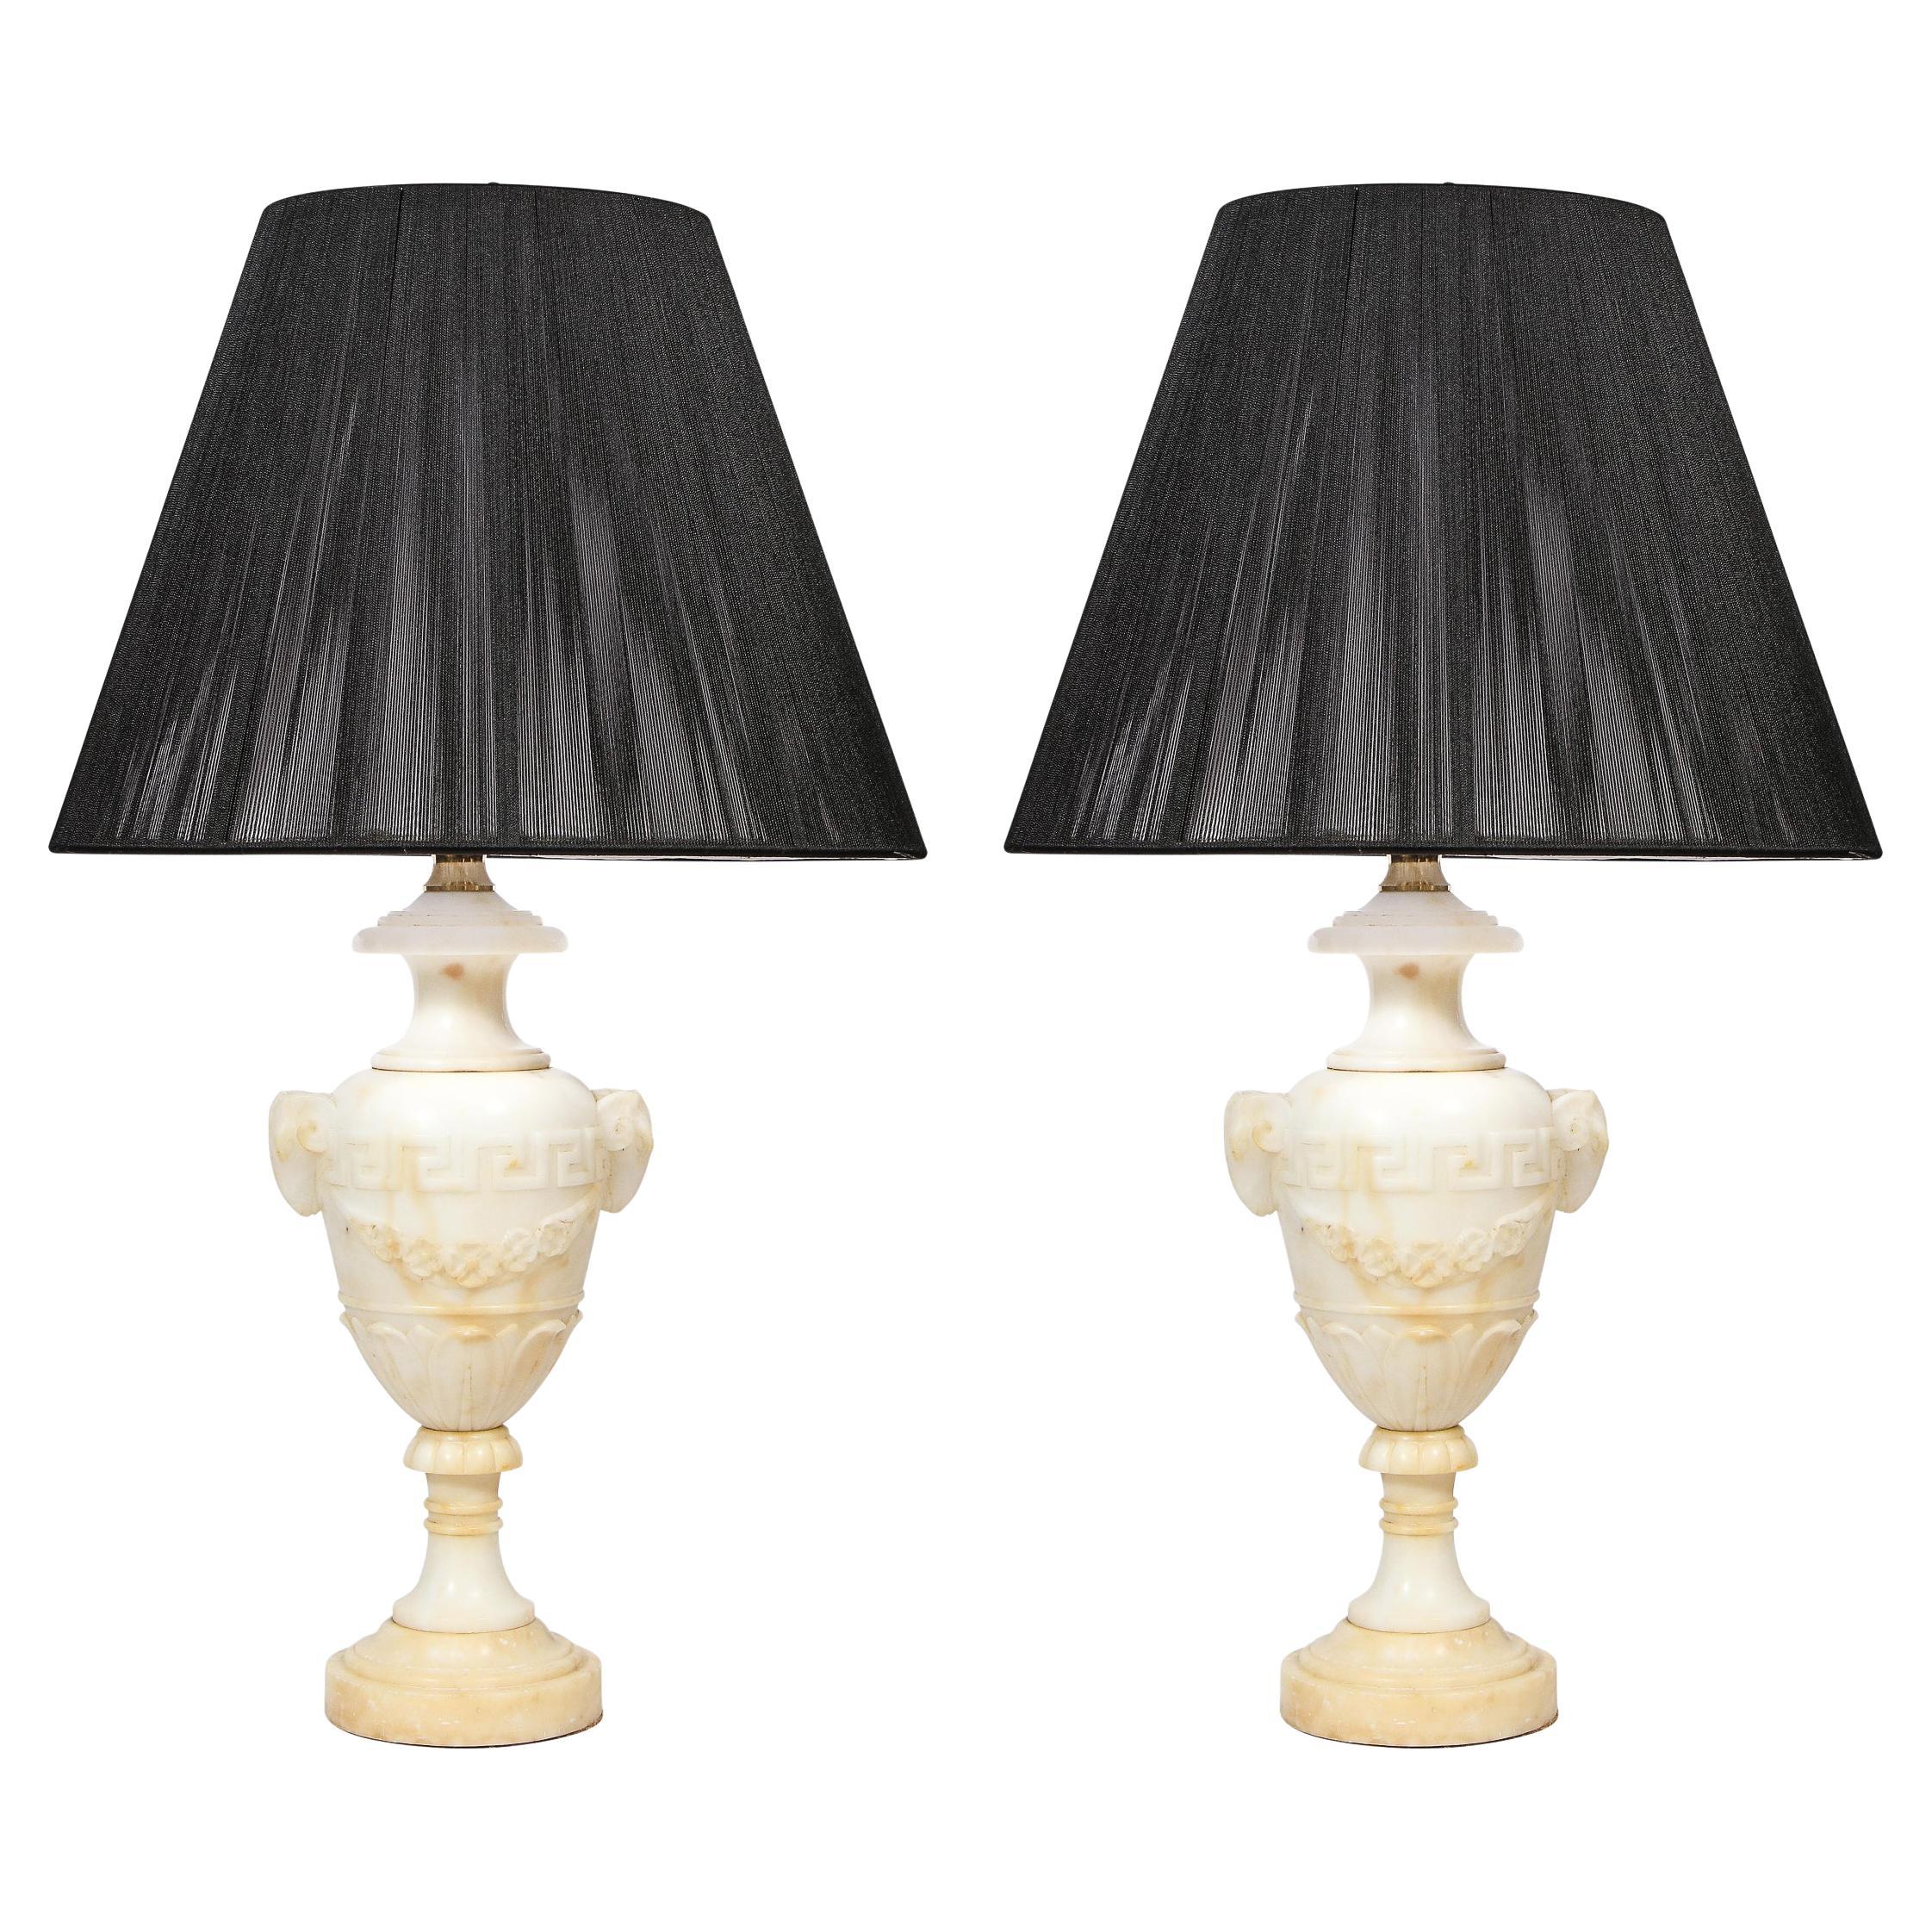 Pair of Hollywood Regency Handcarved Alabaster Lamps w/ Neoclassical Detailing